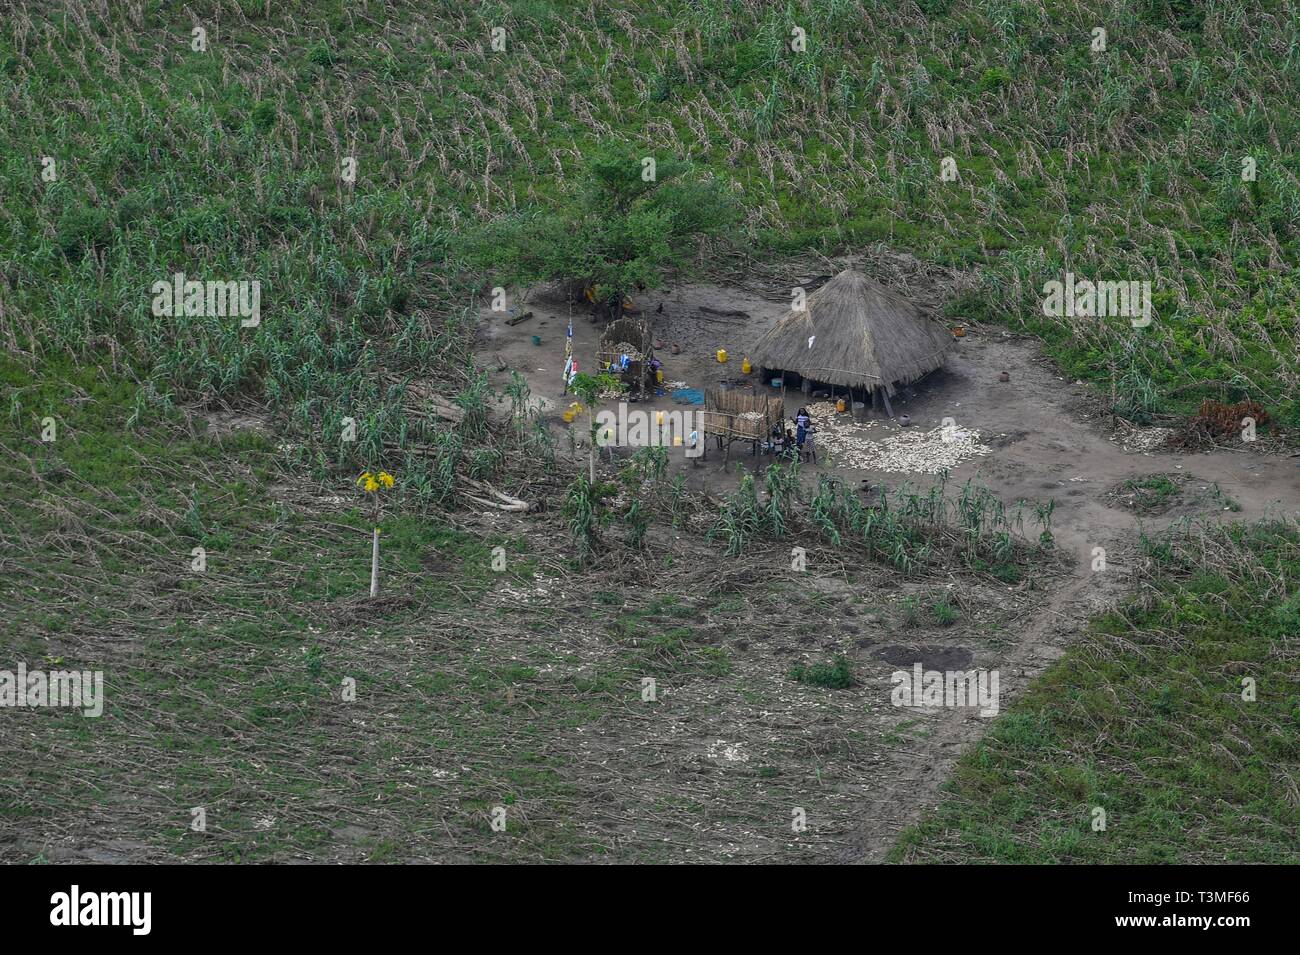 A traditional thatched hut among ruined farmland in the aftermath of the massive Cyclone Idai April 8, 2019 near Bebedo, Mozambique. The World Food Programme, with help from the U.S. Air Force is transporting emergency relief supplies to assist the devastated region. Stock Photo